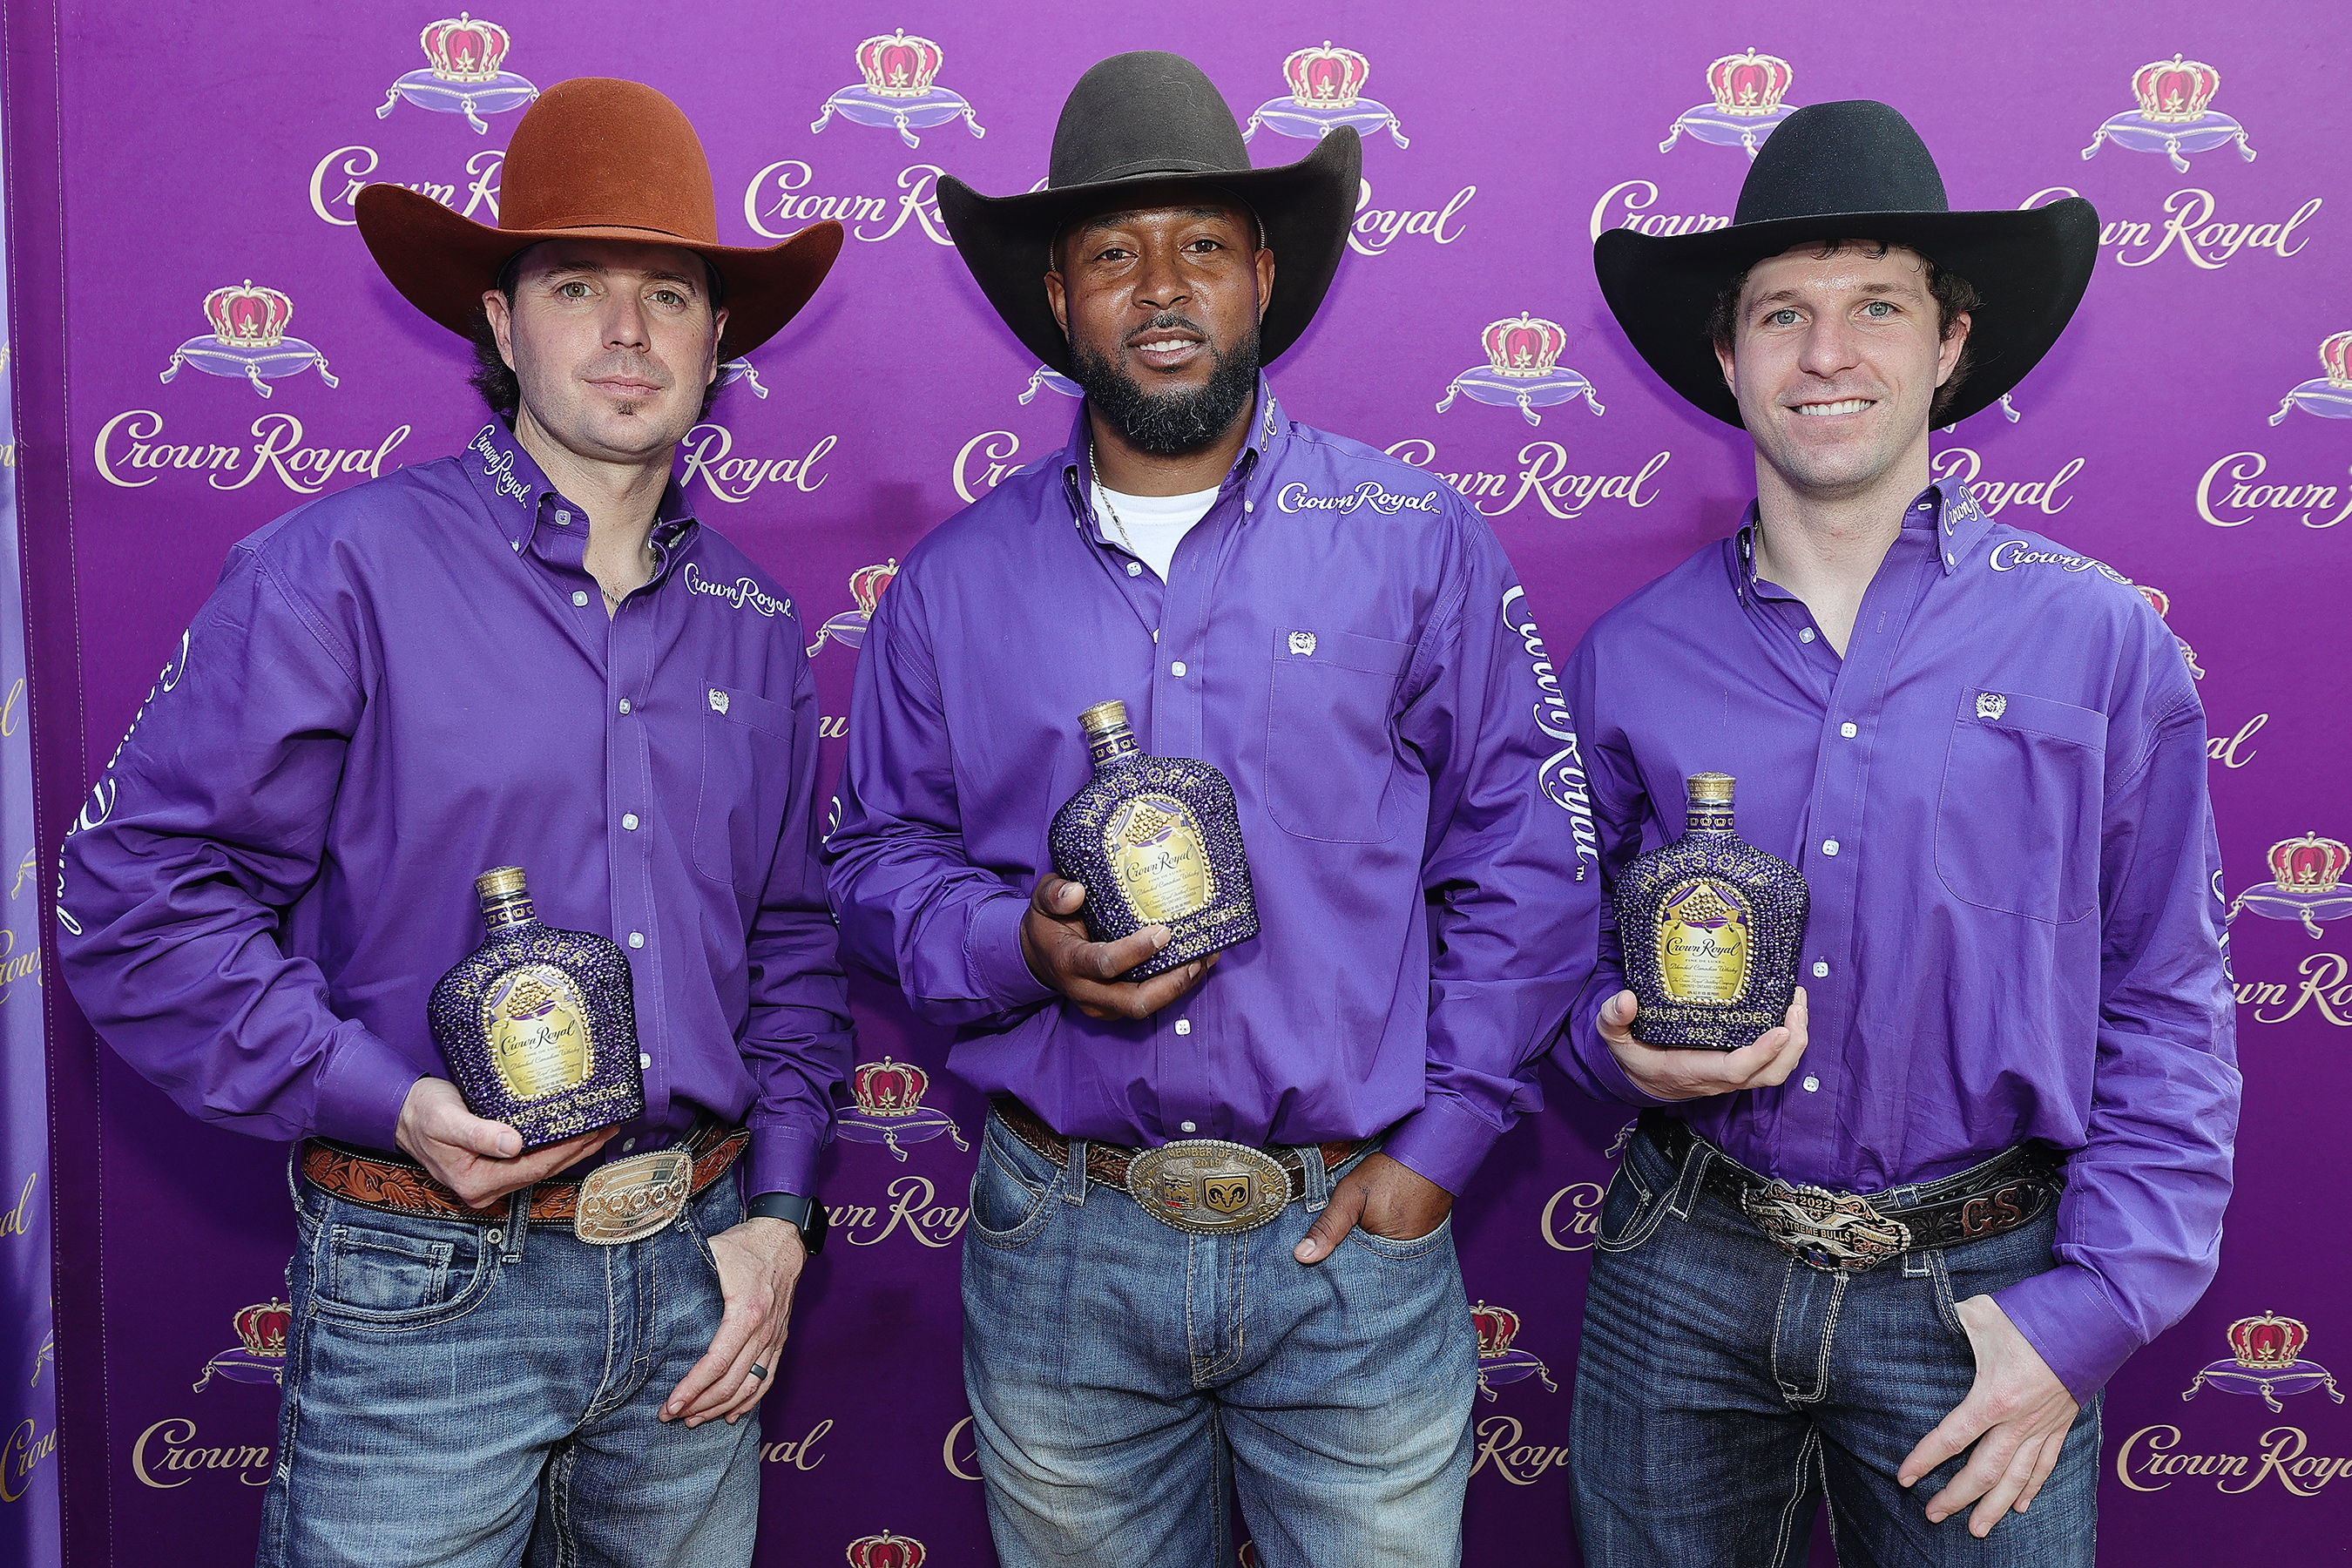 Wesley Silcox, Tory Johnson and Garrett Smith are awarded the Crown Royal “Royal Rider” award at the Houston Rodeo at NRG Park in Houston, Texas. (Photo by Bob Levey/Getty Images for Crown Royal)